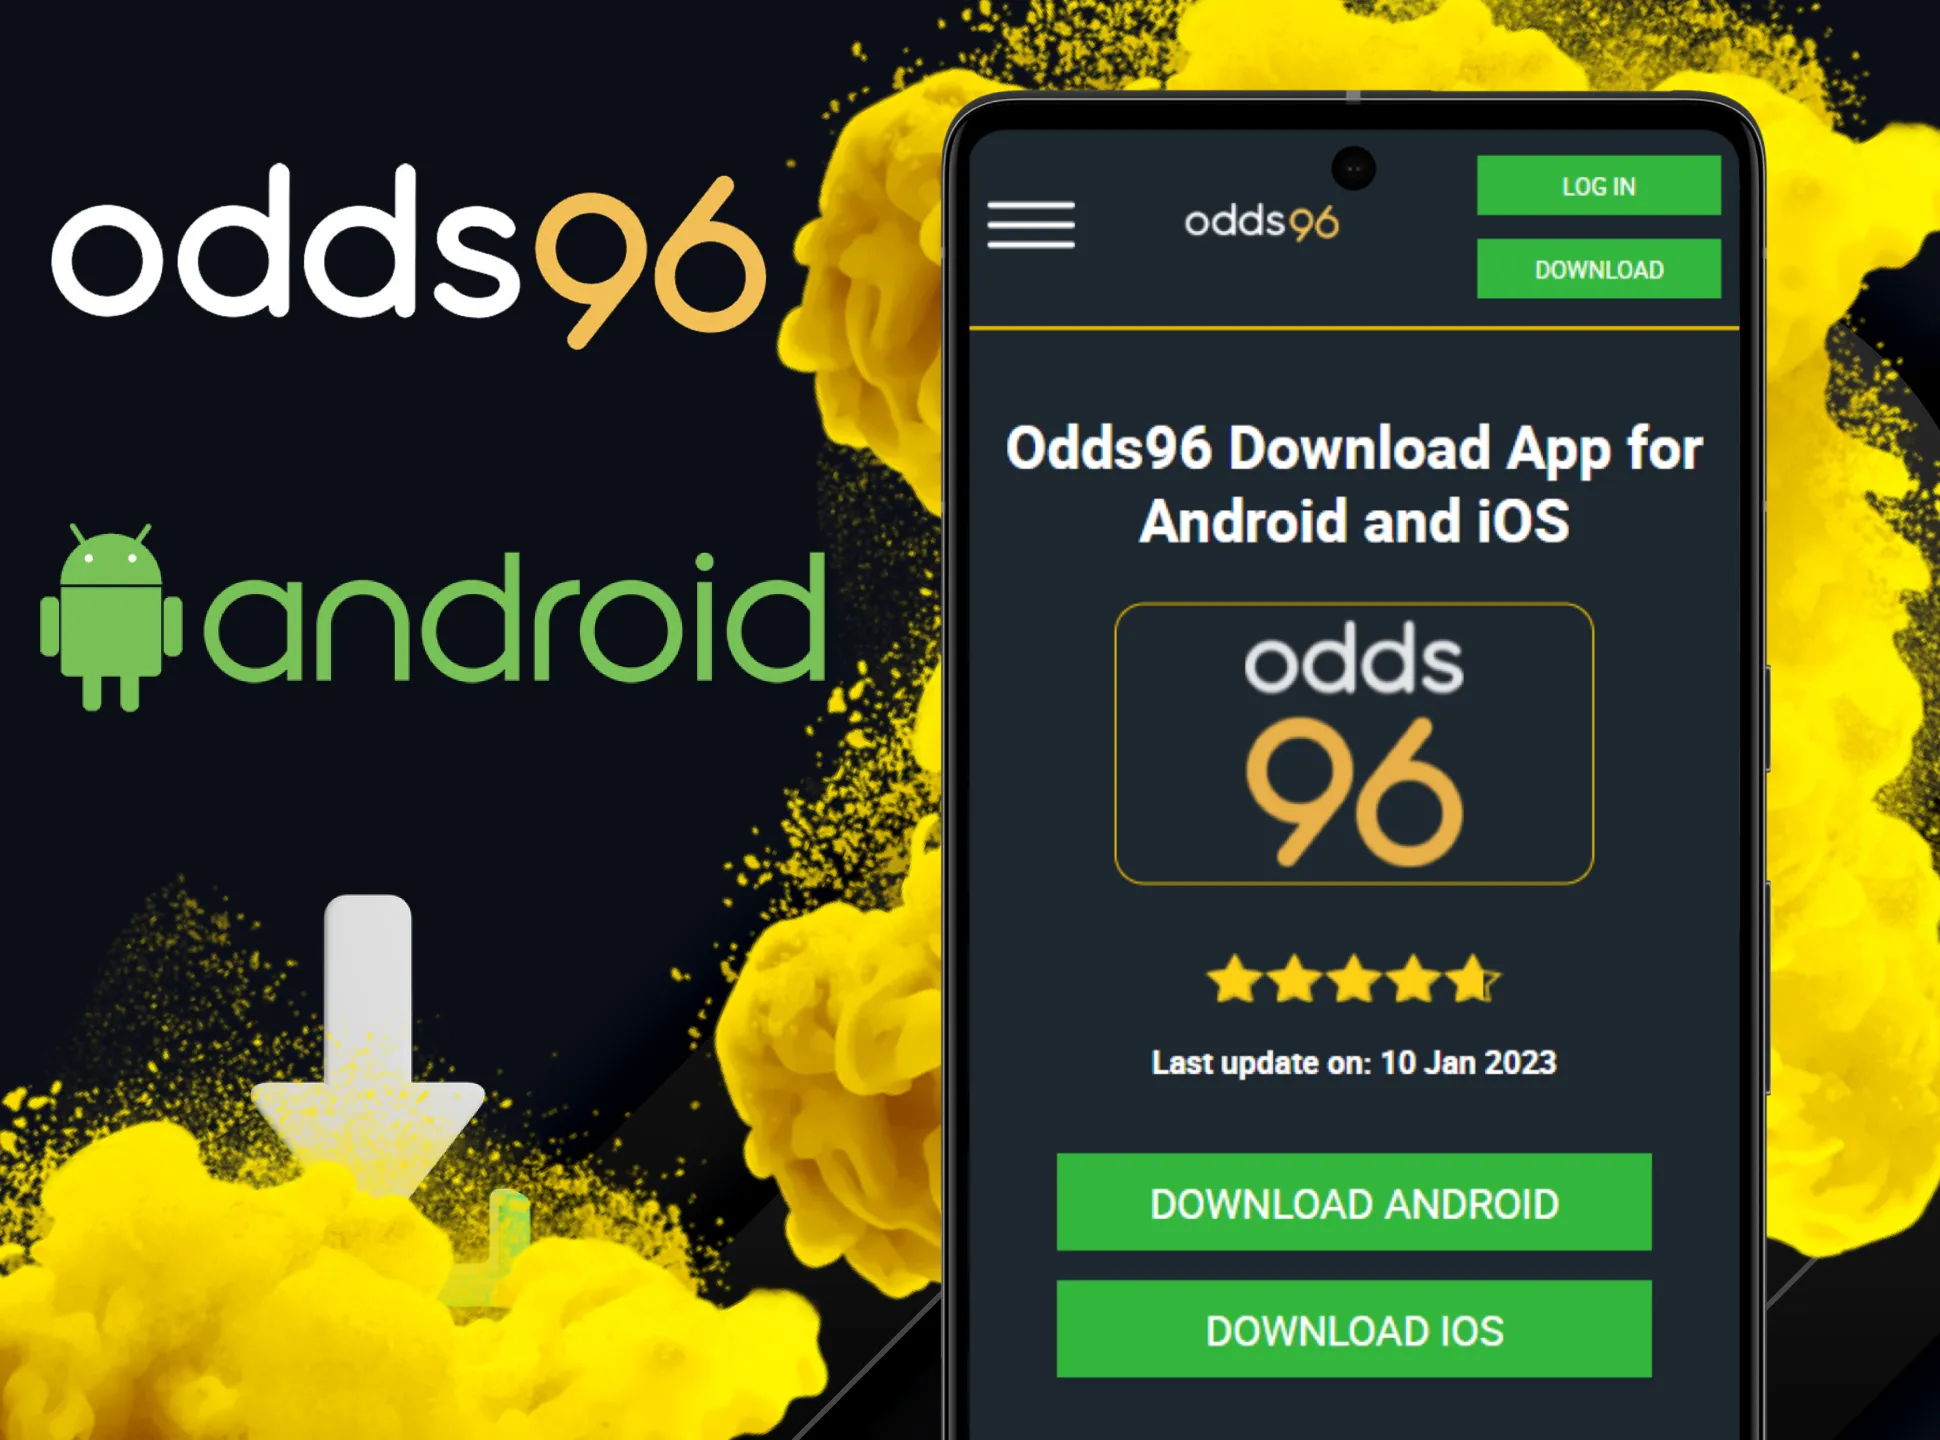 Download Odds96 app on your Android phone.